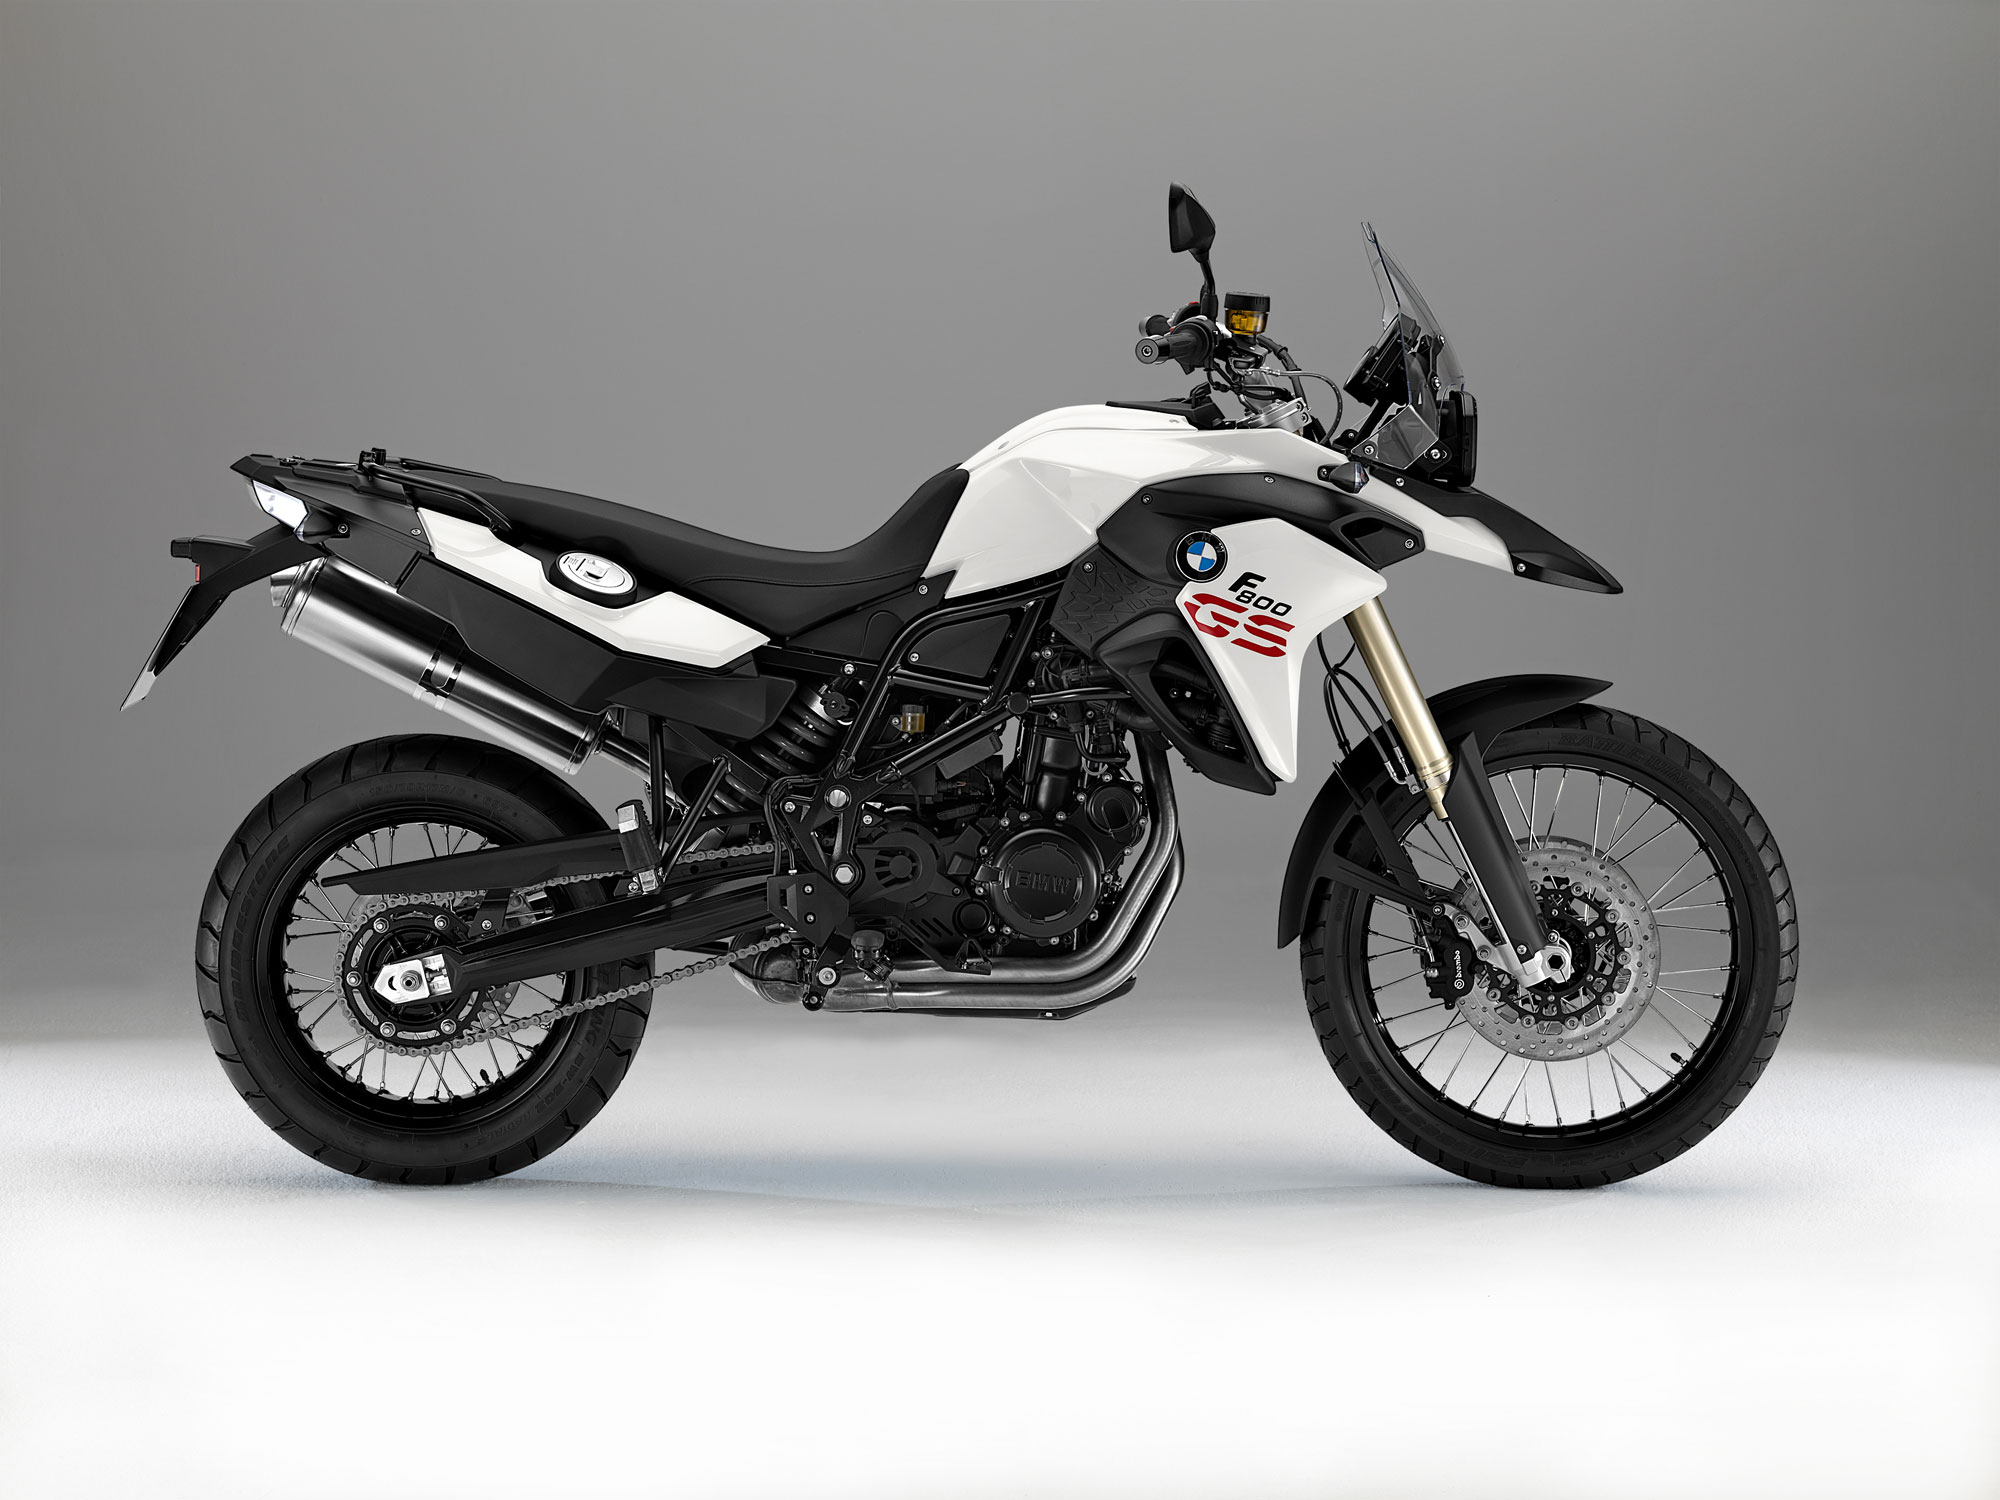 Bmw F800gs Wallpapers Vehicles Hq Bmw F800gs Pictures 4k Wallpapers 2019